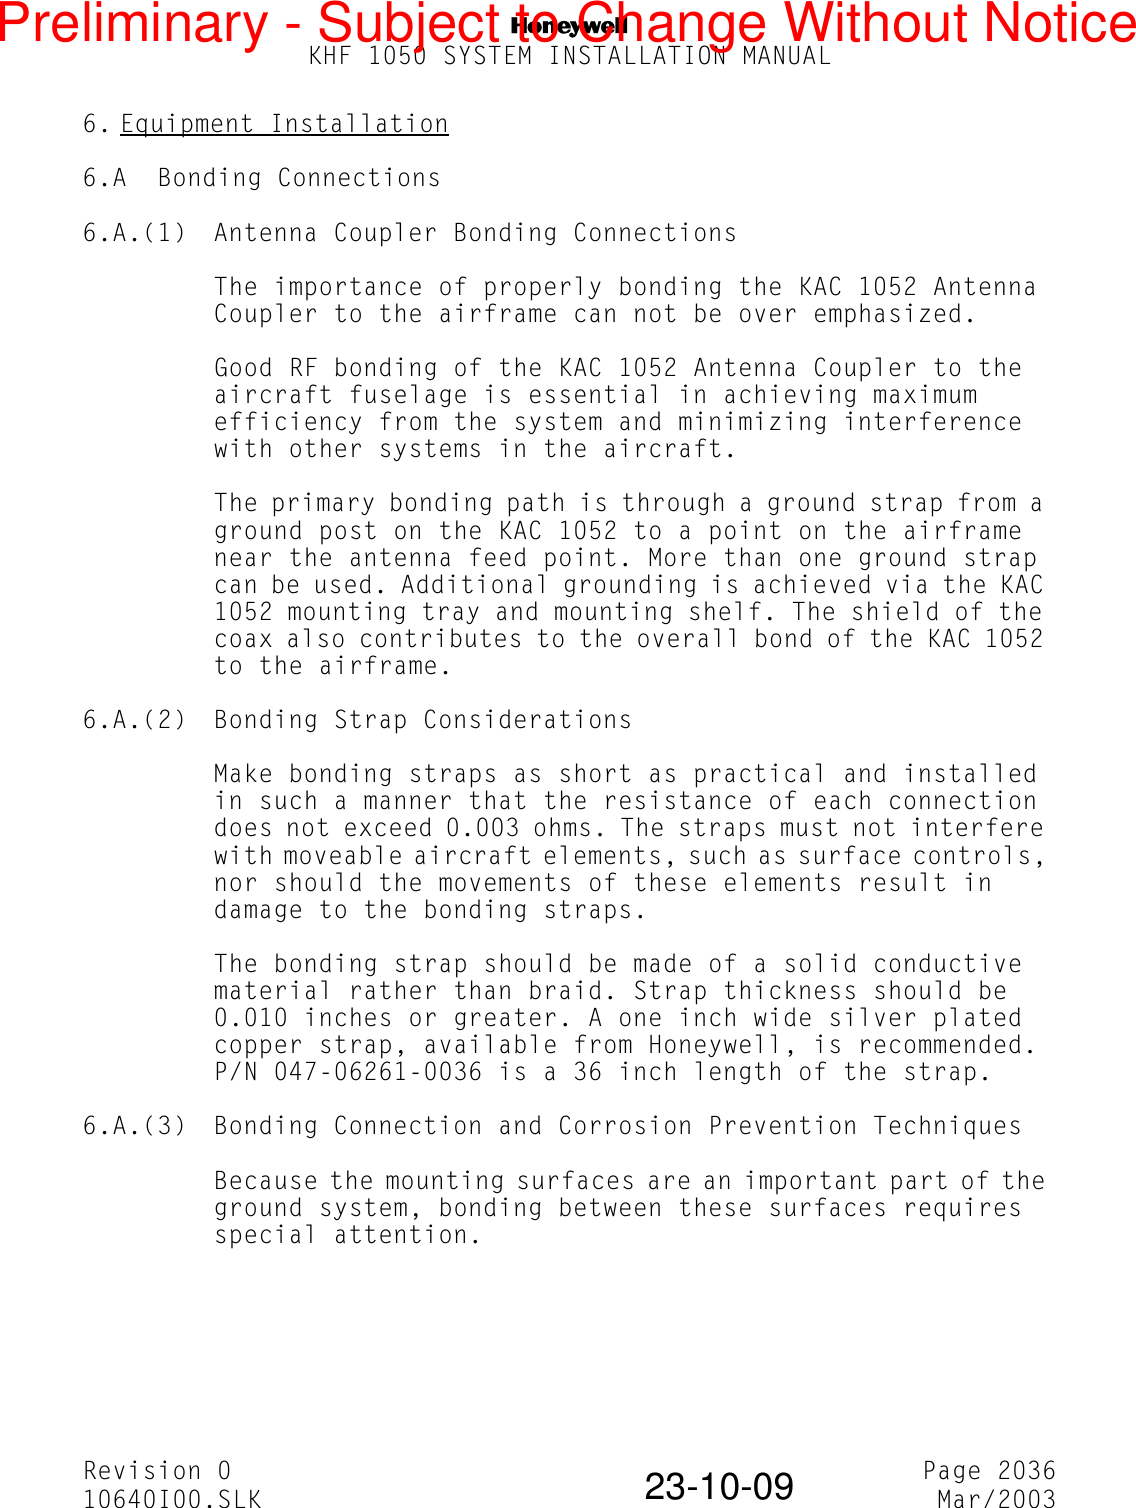 NKHF 1050 SYSTEM INSTALLATION MANUALRevision 0 Page 203610640I00.SLK Mar/200323-10-096. Equipment Installation6.A Bonding Connections6.A.(1) Antenna Coupler Bonding ConnectionsThe importance of properly bonding the KAC 1052 Antenna Coupler to the airframe can not be over emphasized.Good RF bonding of the KAC 1052 Antenna Coupler to the aircraft fuselage is essential in achieving maximum efficiency from the system and minimizing interference with other systems in the aircraft.The primary bonding path is through a ground strap from a ground post on the KAC 1052 to a point on the airframe near the antenna feed point. More than one ground strap can be used. Additional grounding is achieved via the KAC 1052 mounting tray and mounting shelf. The shield of the coax also contributes to the overall bond of the KAC 1052 to the airframe.6.A.(2) Bonding Strap ConsiderationsMake bonding straps as short as practical and installed in such a manner that the resistance of each connection does not exceed 0.003 ohms. The straps must not interfere with moveable aircraft elements, such as surface controls, nor should the movements of these elements result in damage to the bonding straps.The bonding strap should be made of a solid conductive material rather than braid. Strap thickness should be 0.010 inches or greater. A one inch wide silver plated copper strap, available from Honeywell, is recommended. P/N 047-06261-0036 is a 36 inch length of the strap.6.A.(3) Bonding Connection and Corrosion Prevention TechniquesBecause the mounting surfaces are an important part of the ground system, bonding between these surfaces requires special attention.Preliminary - Subject to Change Without Notice